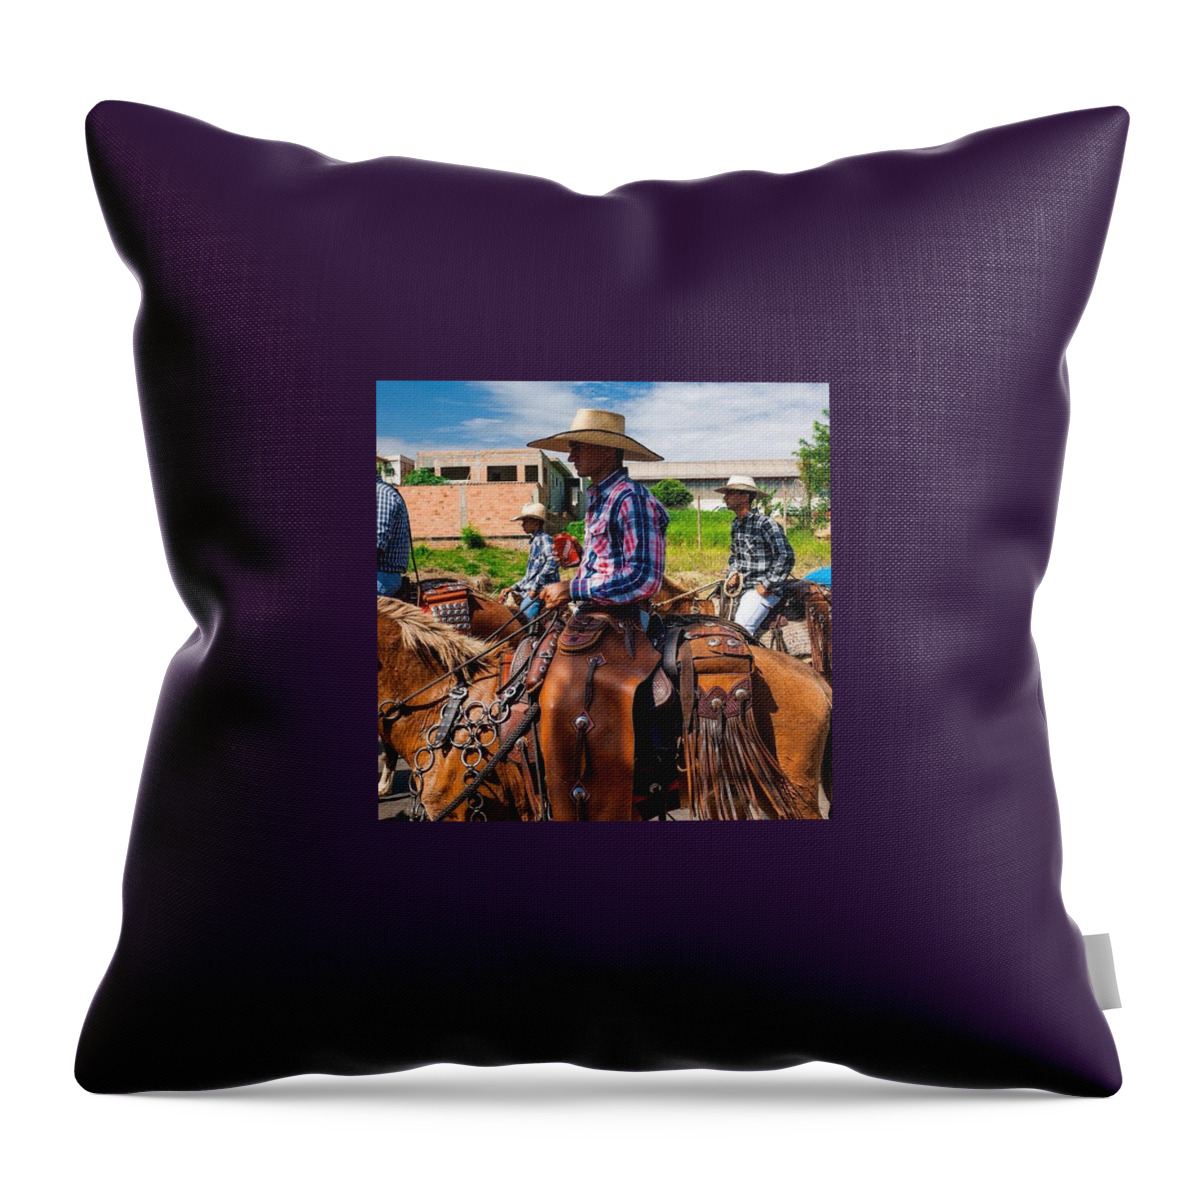 Brazil Throw Pillow featuring the photograph Cowboys In Brazil by Aleck Cartwright